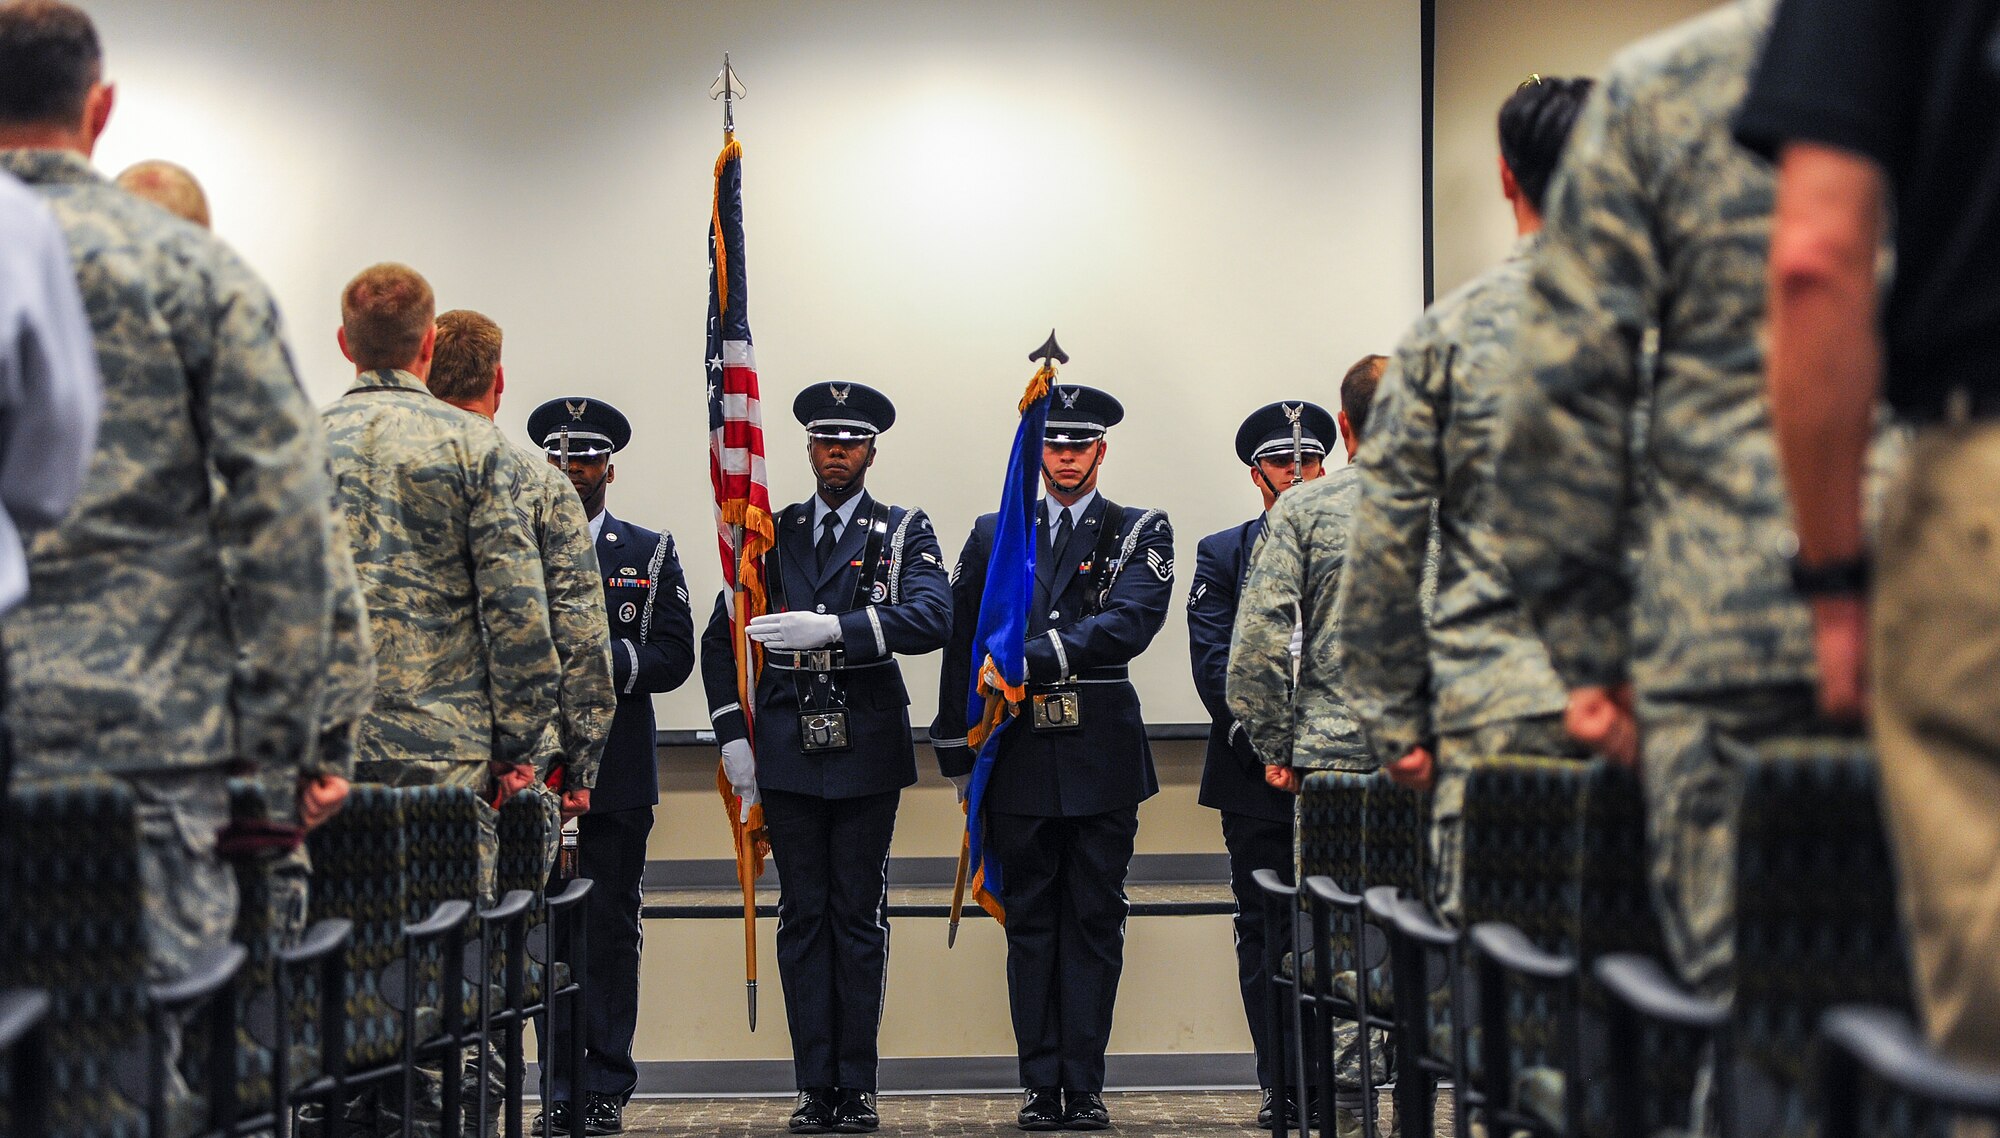 Hurlburt Field Honor Guardsmen present the colors at the 10th Combat Weather Squadron deactivation ceremony on Hurlburt Field, Fla., May 7, 2014. More than 100 Airmen attended the event. (U.S. Air Force photo/Airman 1st Class Jeff Parkinson)